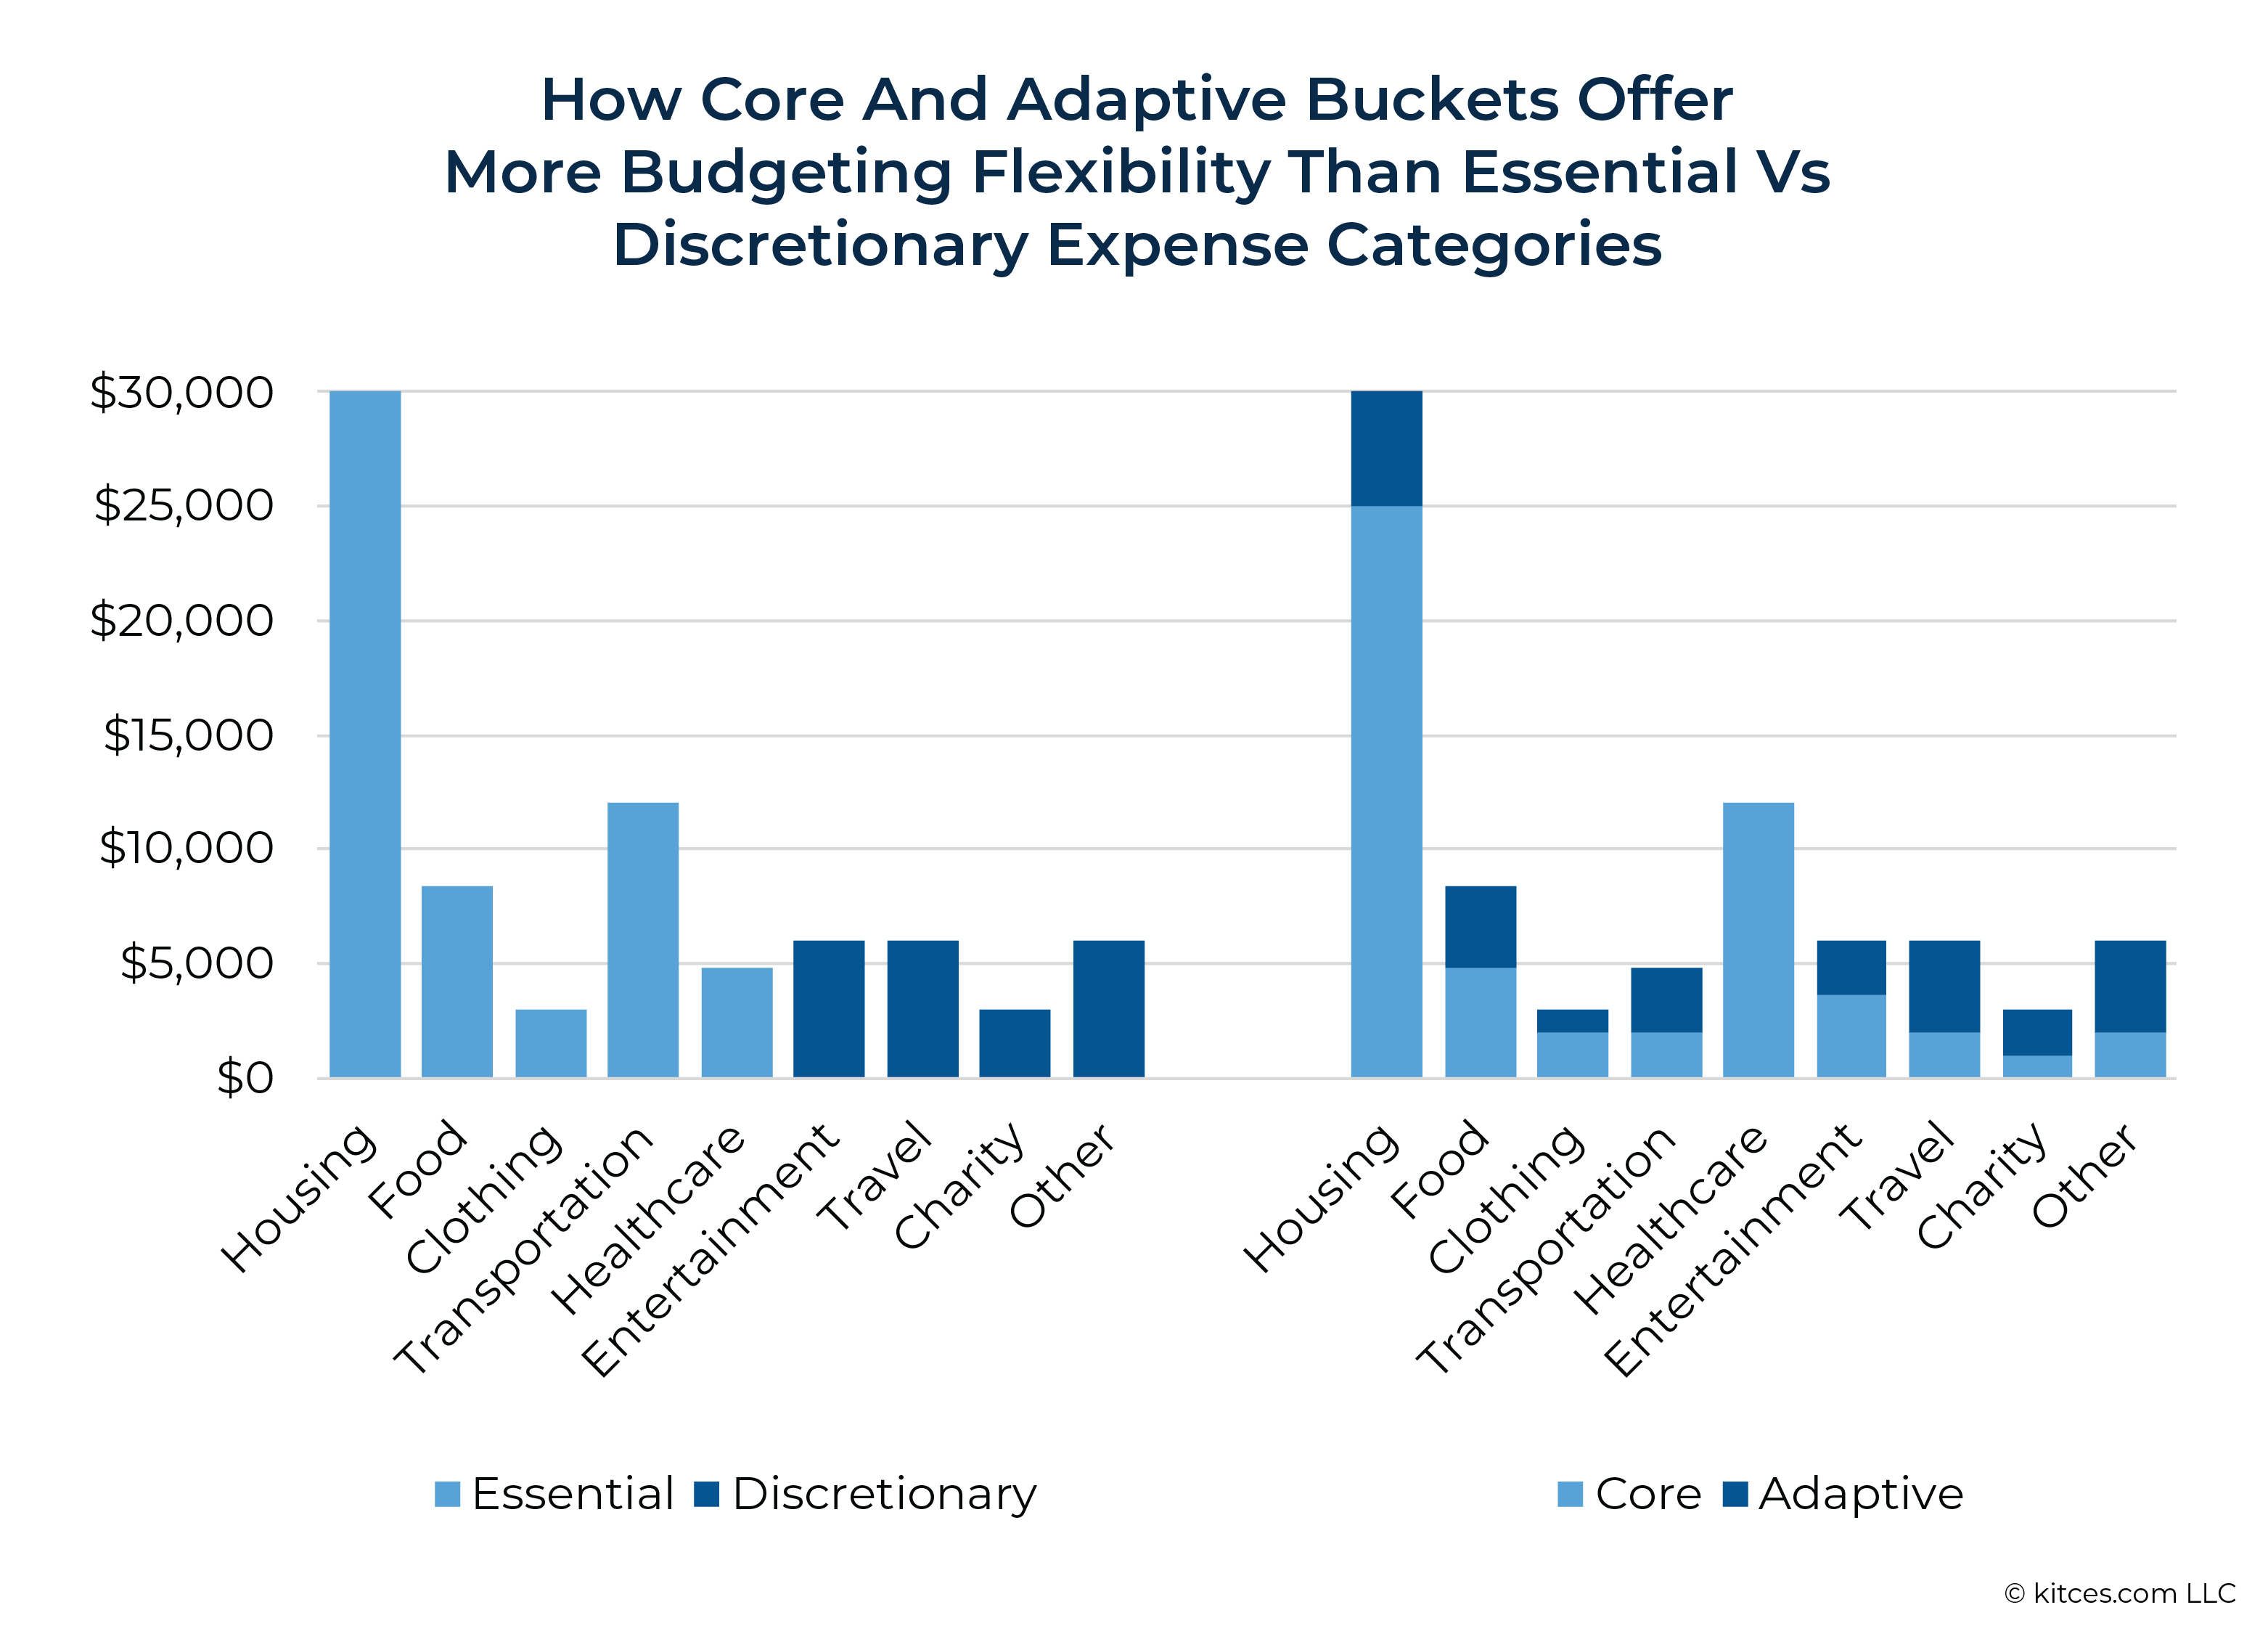 How Core and Adaptive Buckets Offer More Budgeting Flexibility Than Essential Vs Discretionary Expense Categories